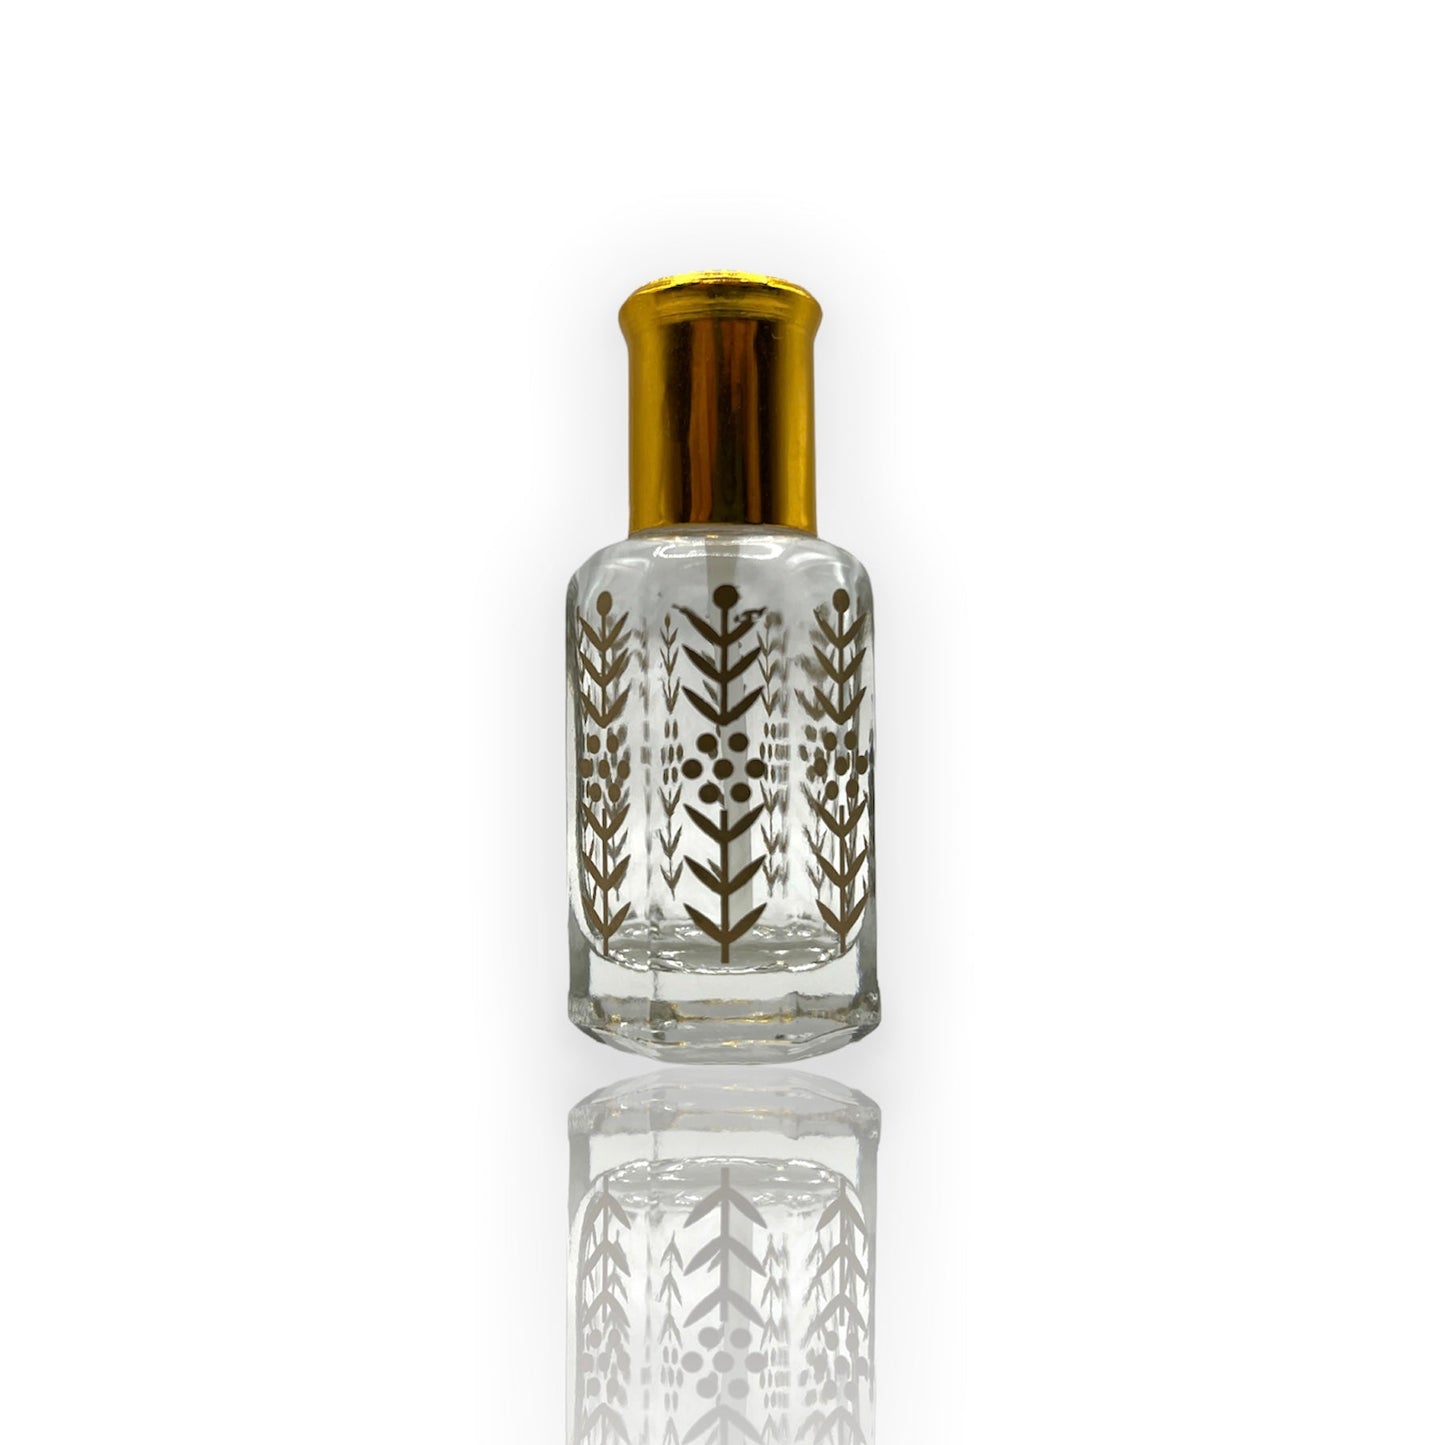 M-03 Oil Perfume *Inspired By Invictus